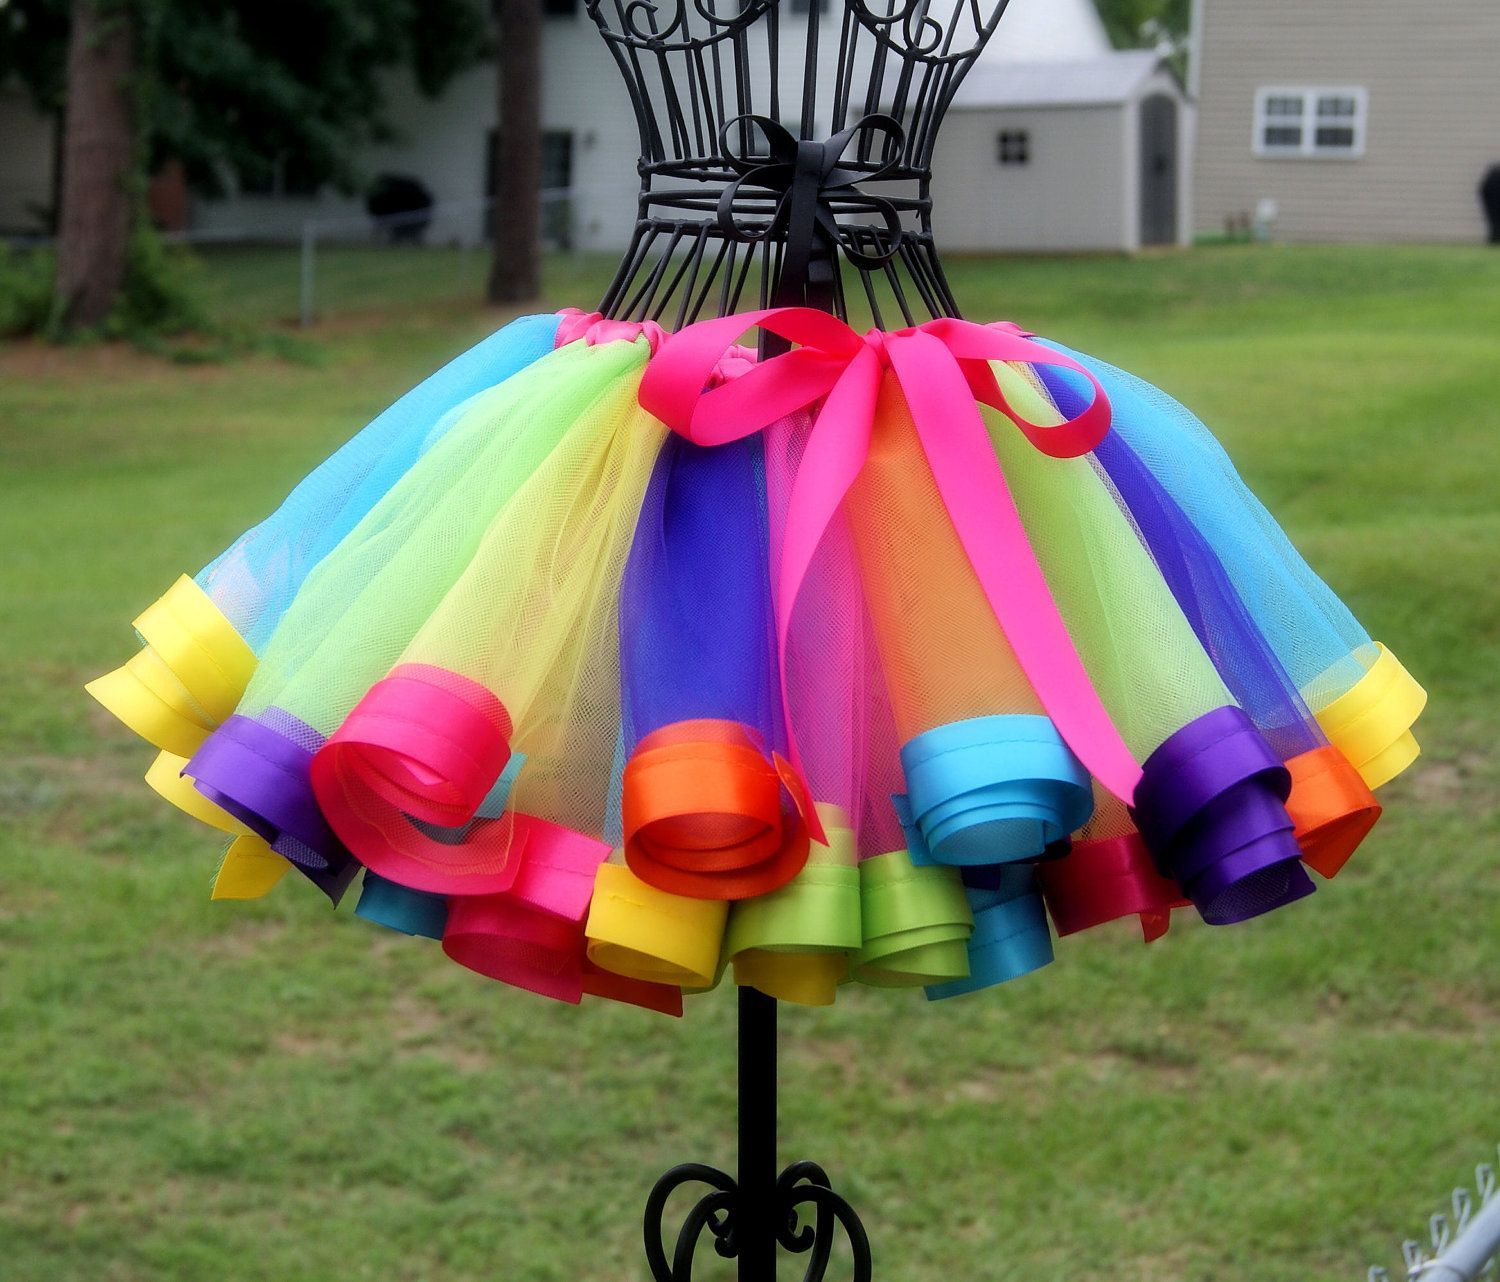 OMG!!! Always loved tutus, but have been looking for a different spin to add! LO